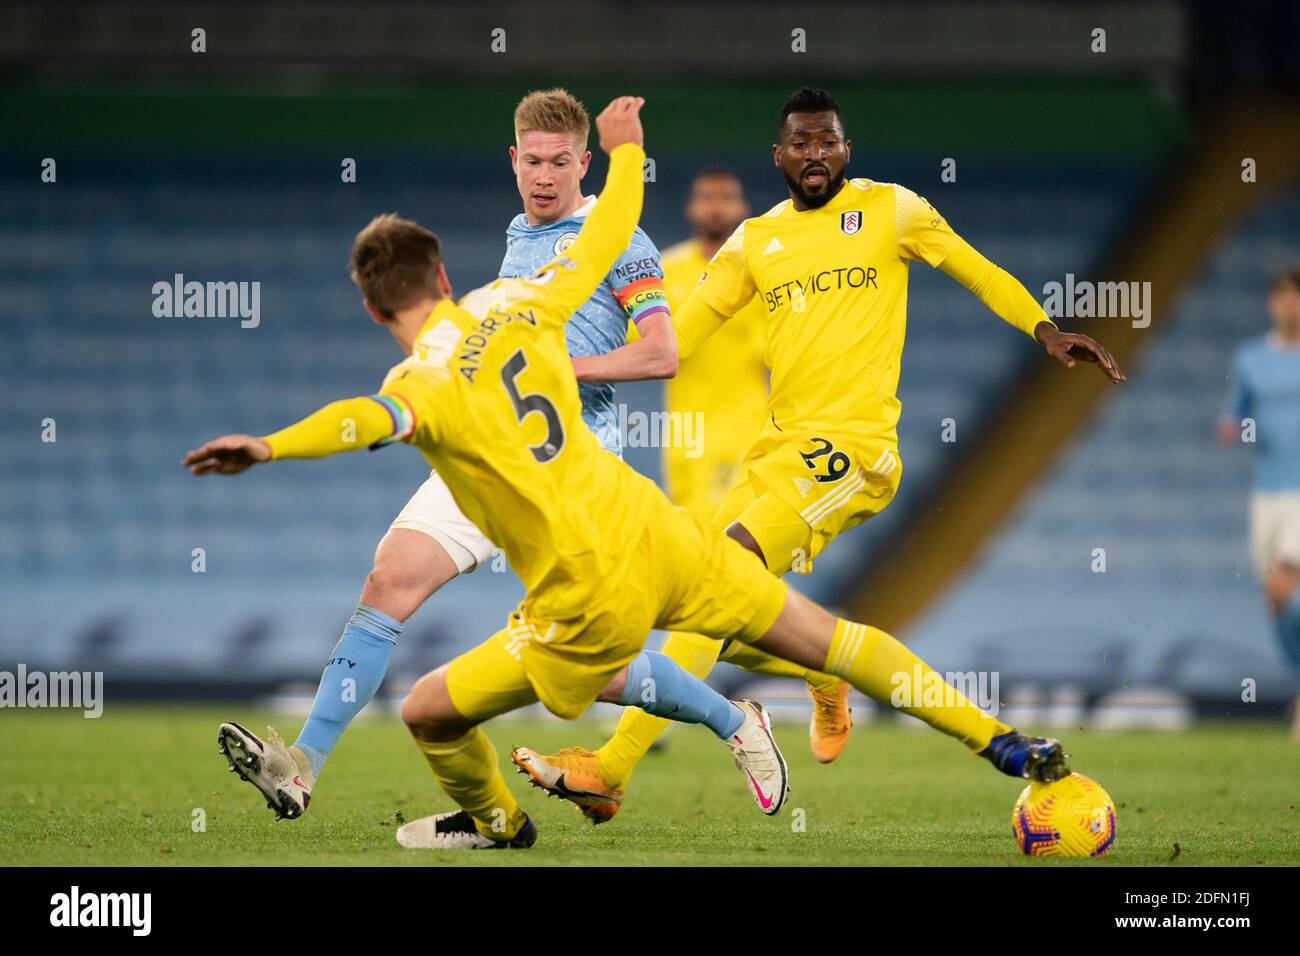 Joachim Andersen High Resolution Stock Photography and Images - Alamy